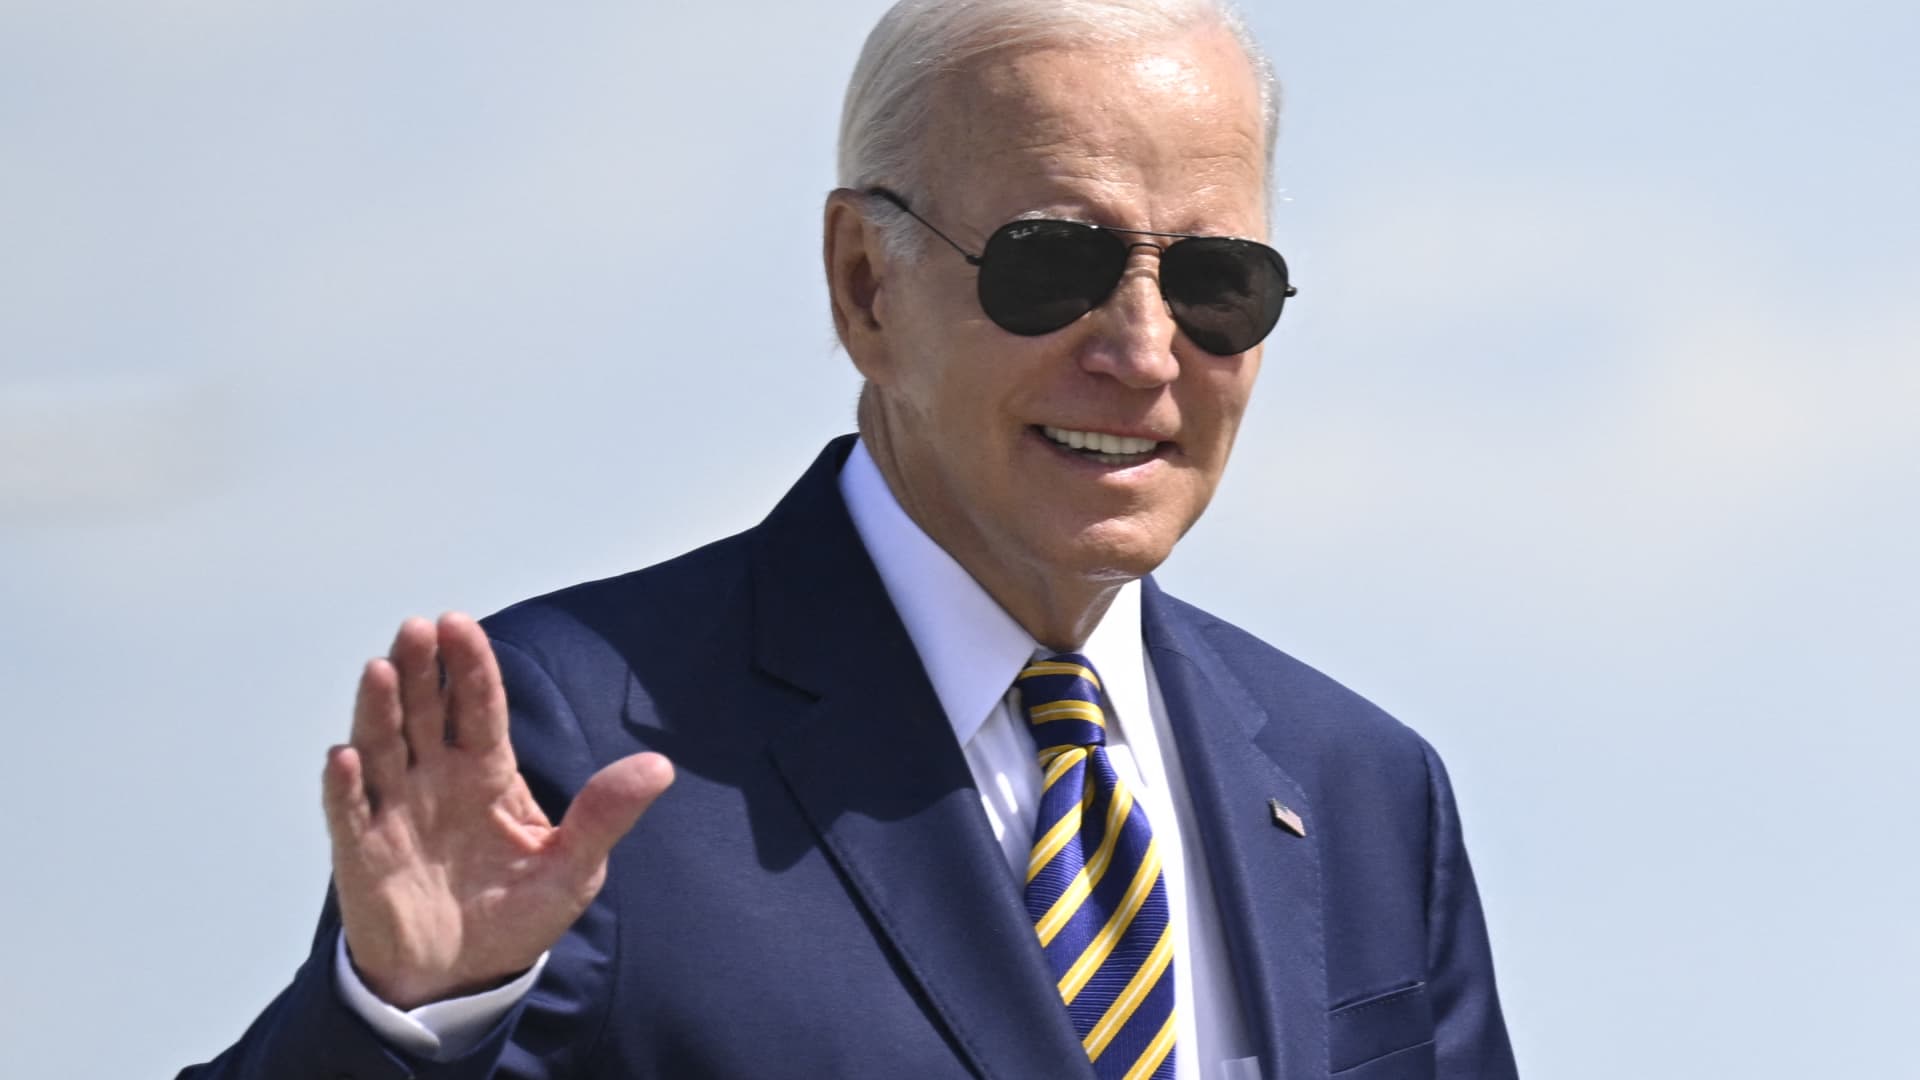 Although President Joe Biden's plans to cancel up to $400 billion in student debt for tens of millions of Americans were foiled over the summer a